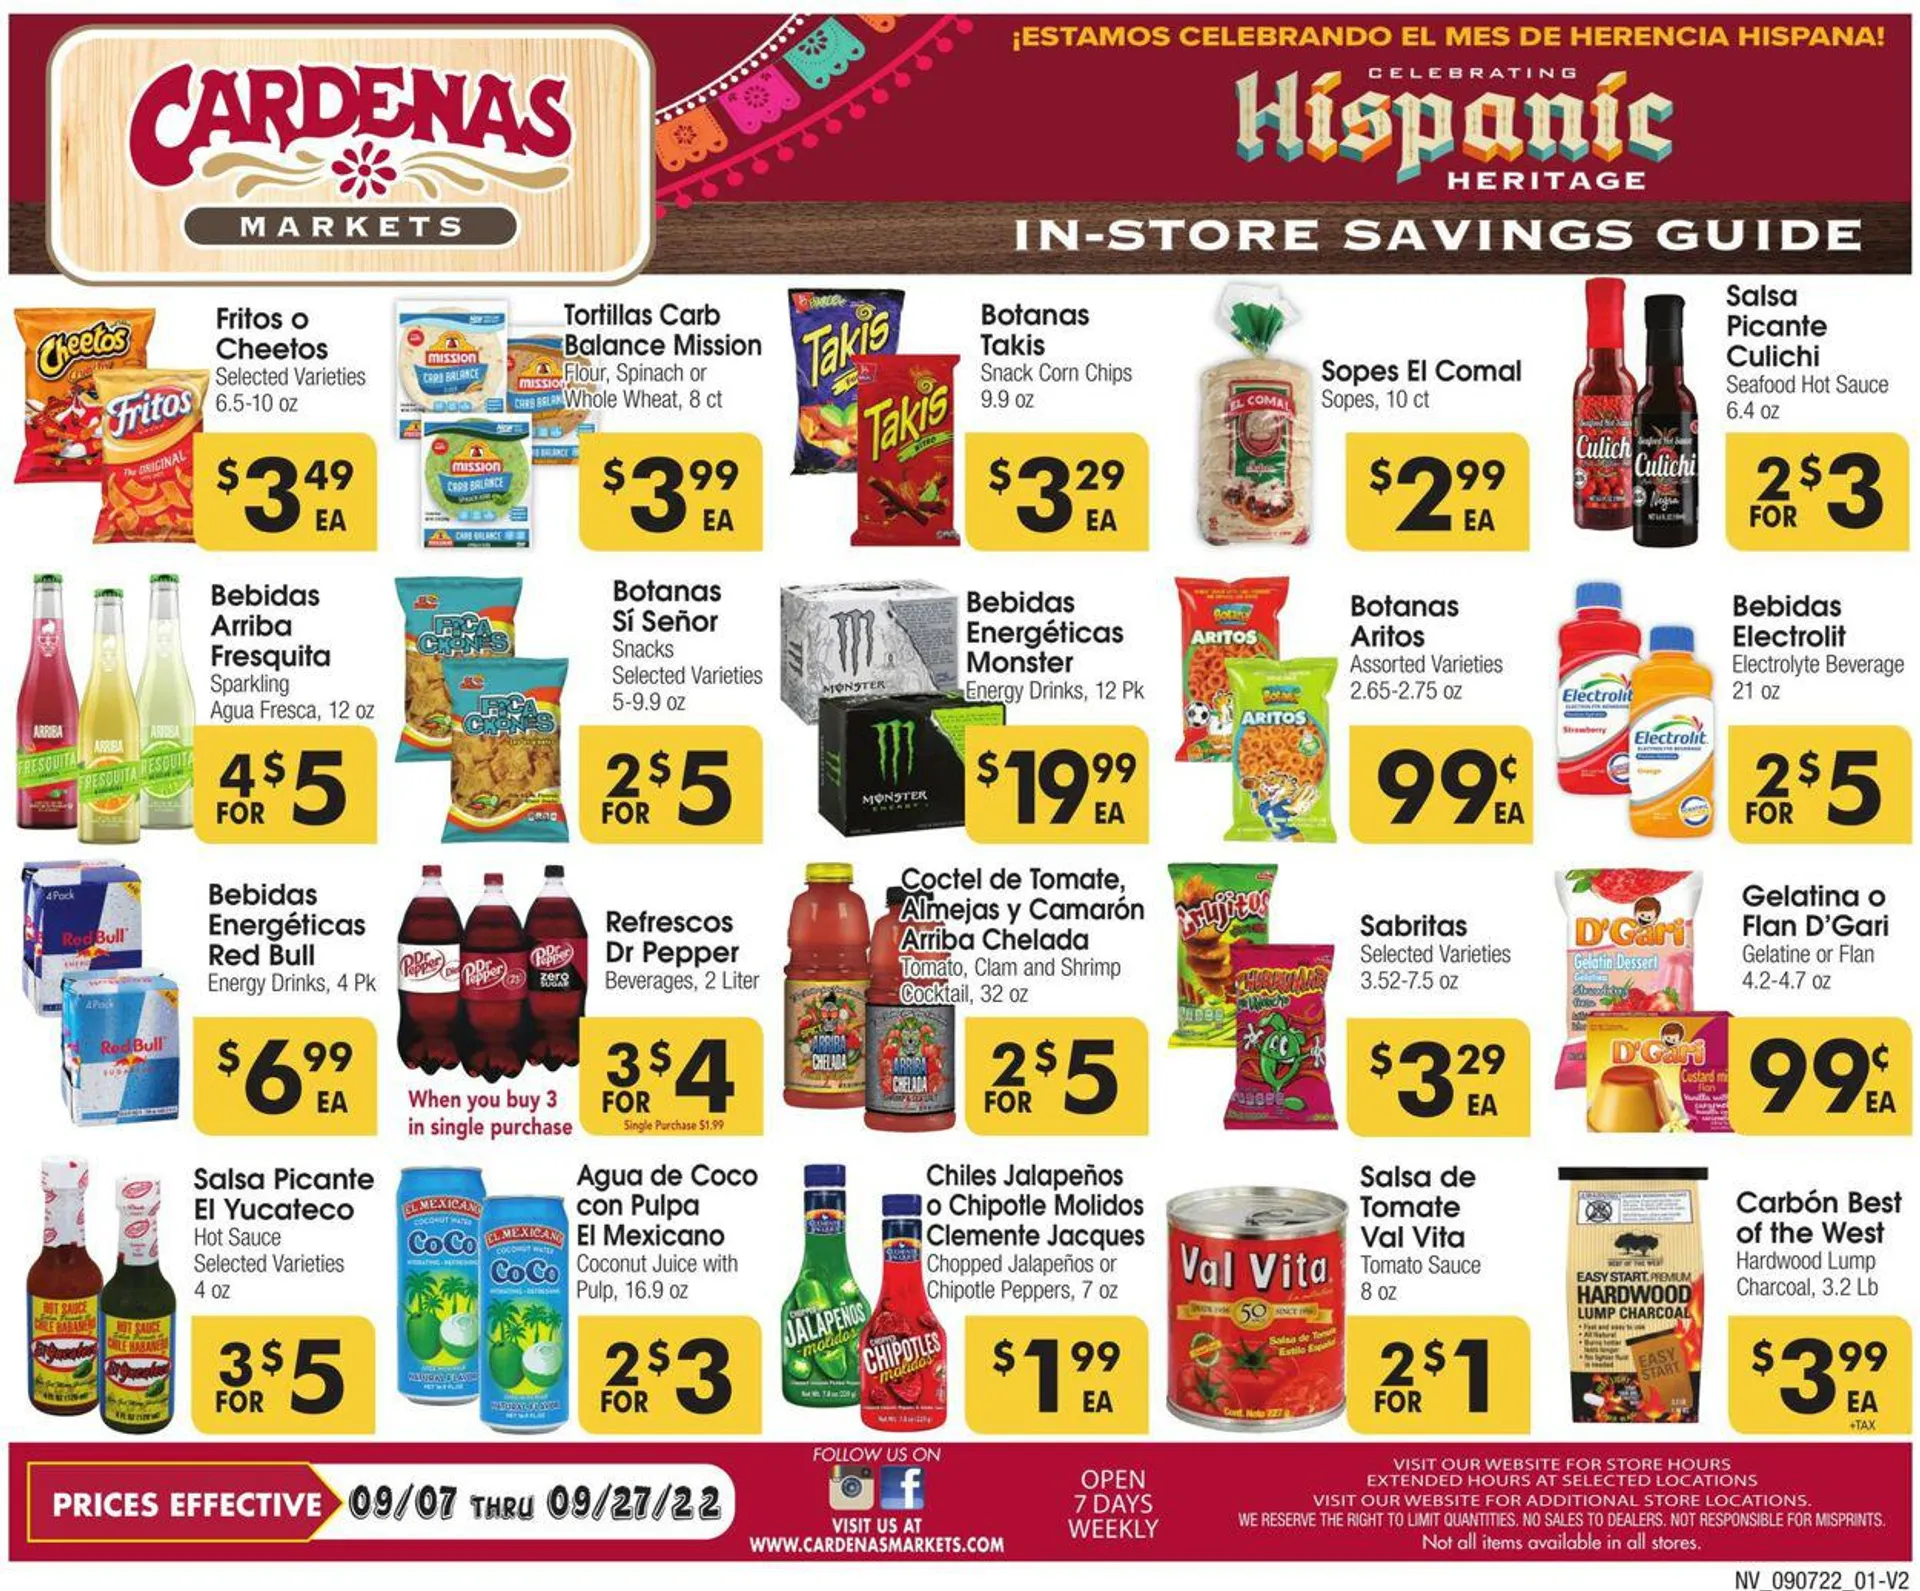 Cardenas Current weekly ad - 1